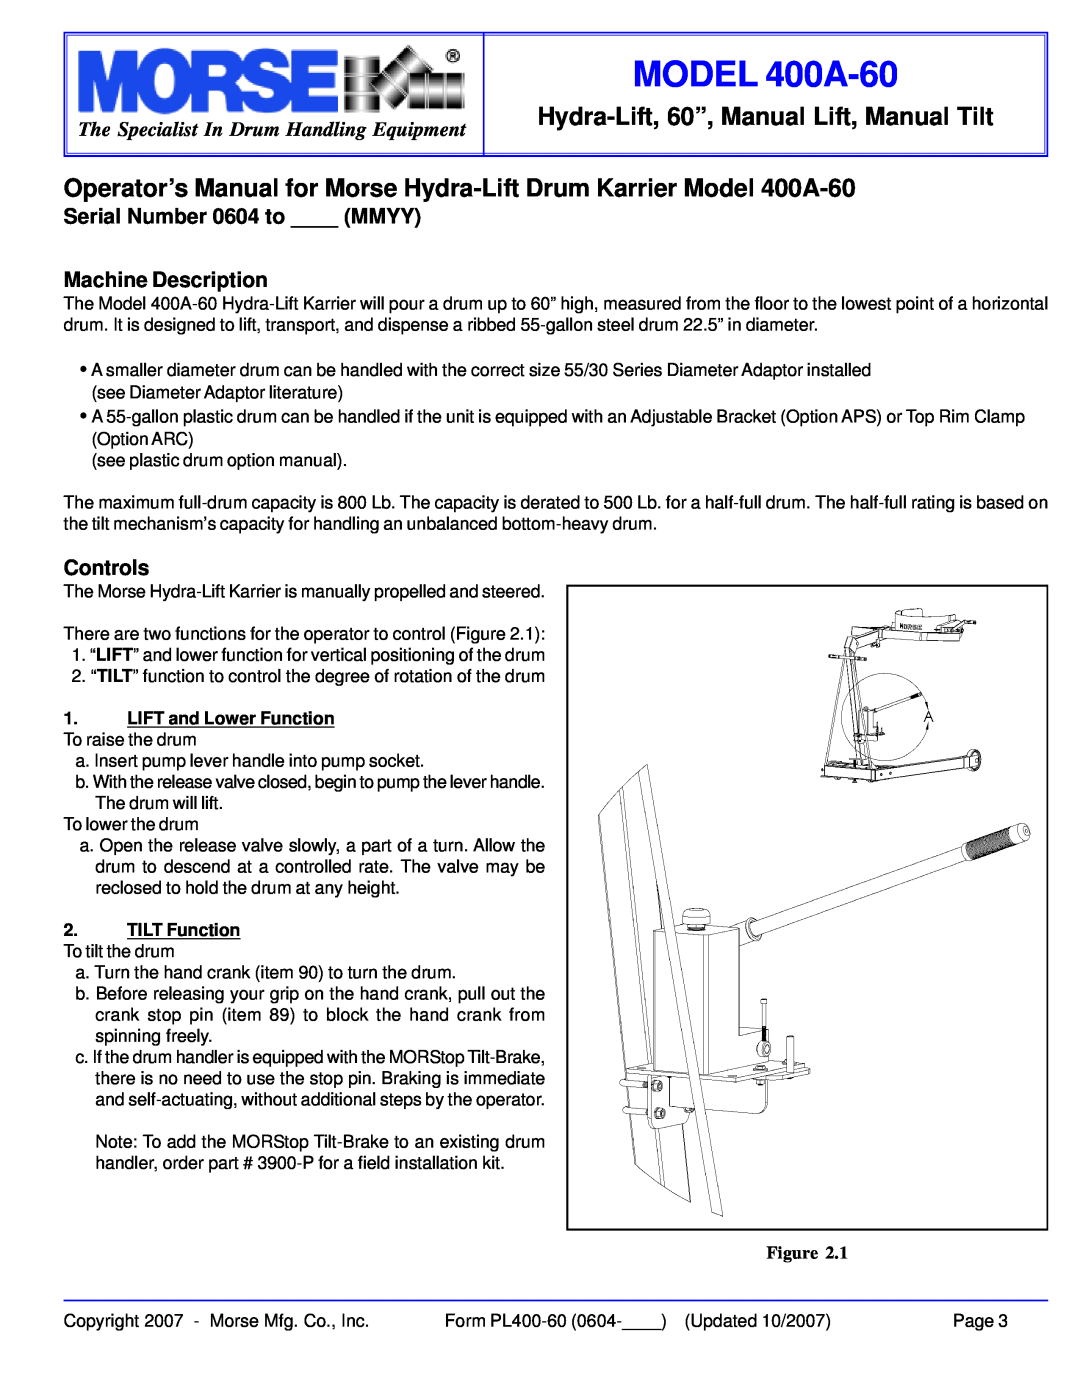 HydroSurge warranty Serial Number 0604 to MMYY Machine Description, Controls, LIFT and Lower Function, MODEL 400A-60 